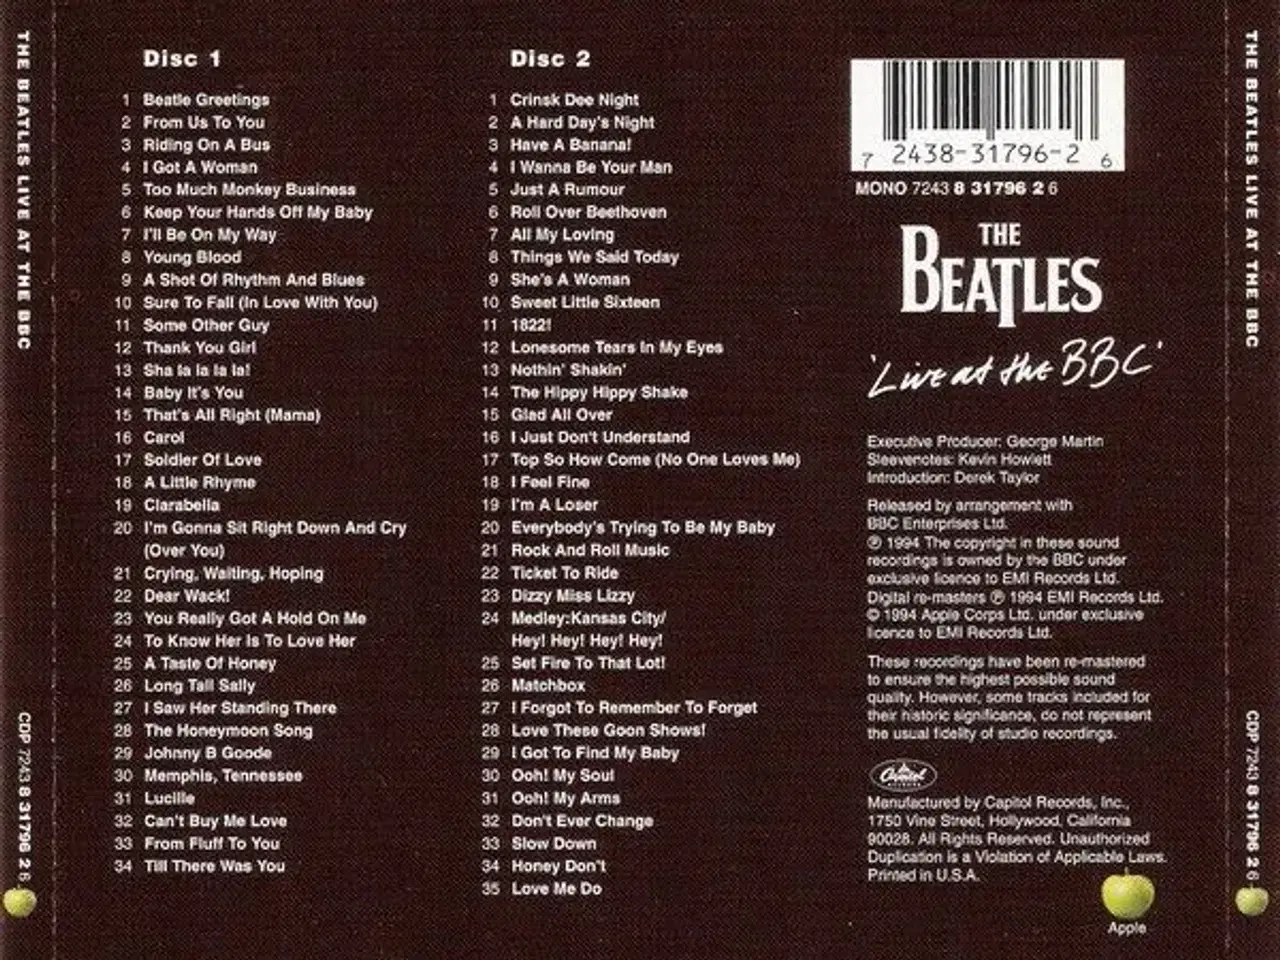 Billede 2 - The Beatles ; 2 cd ; Live at the BBC 